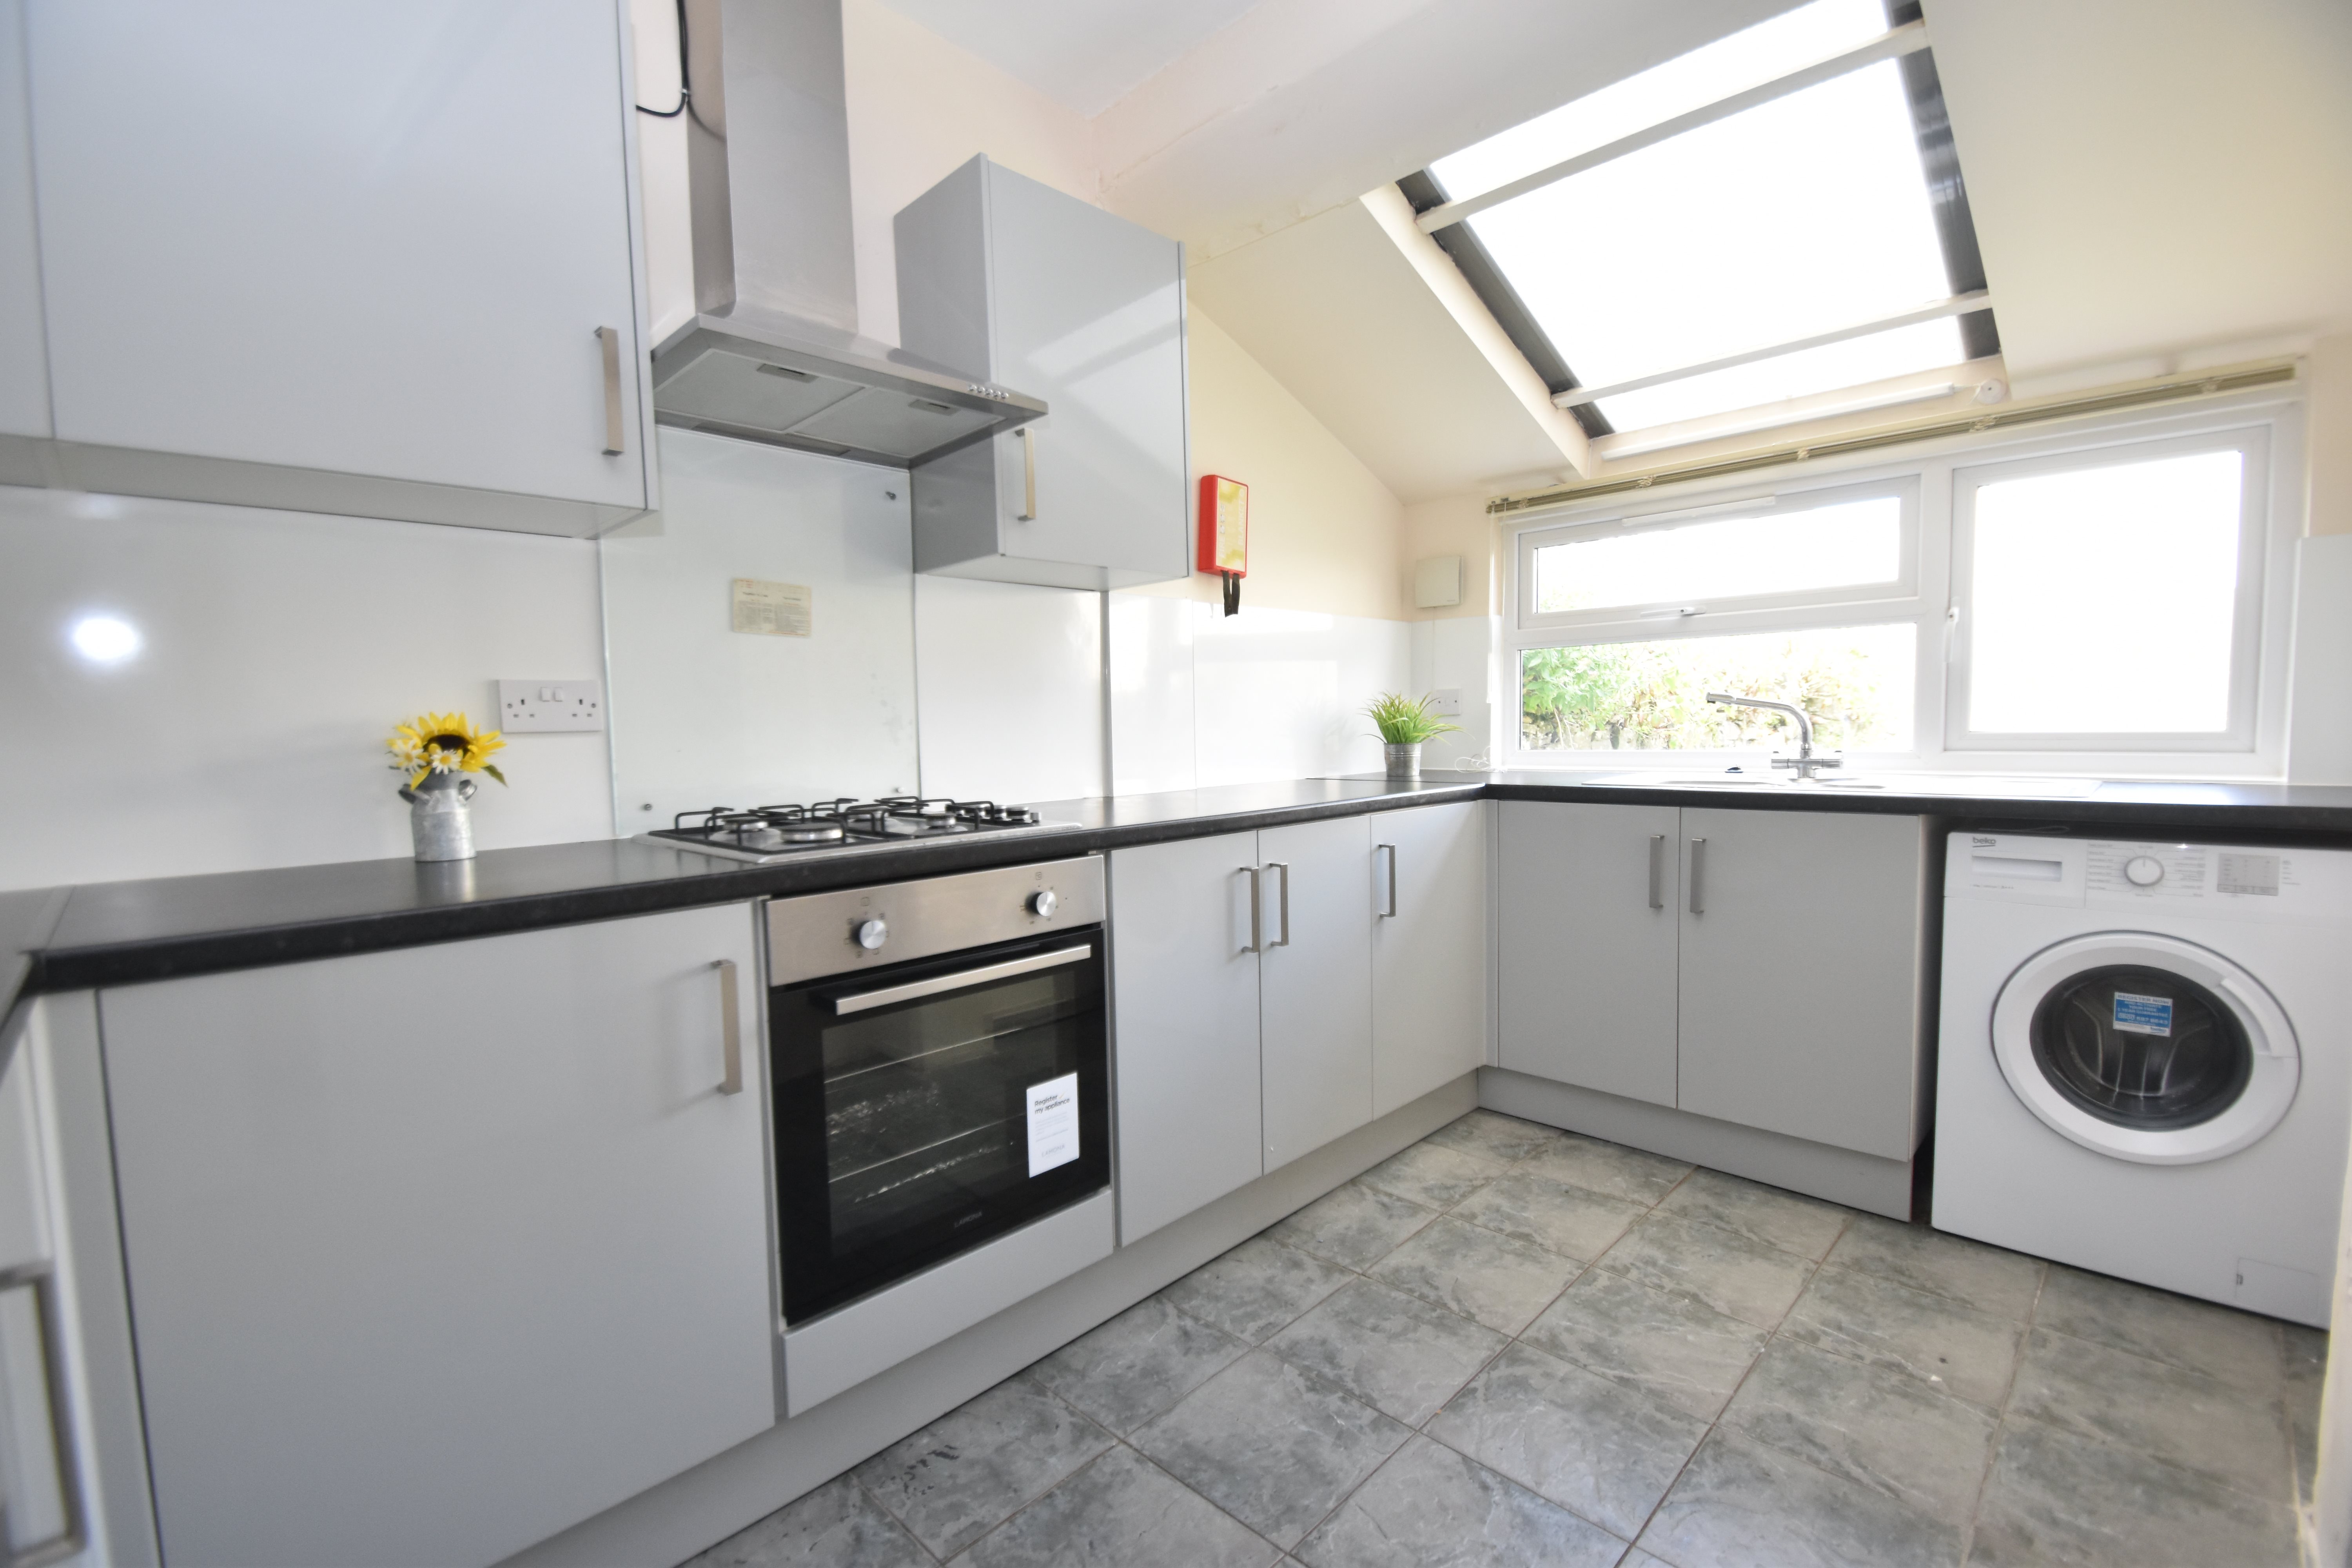 5 bed house to rent in Malefant Street, Cathays - Property Image 1